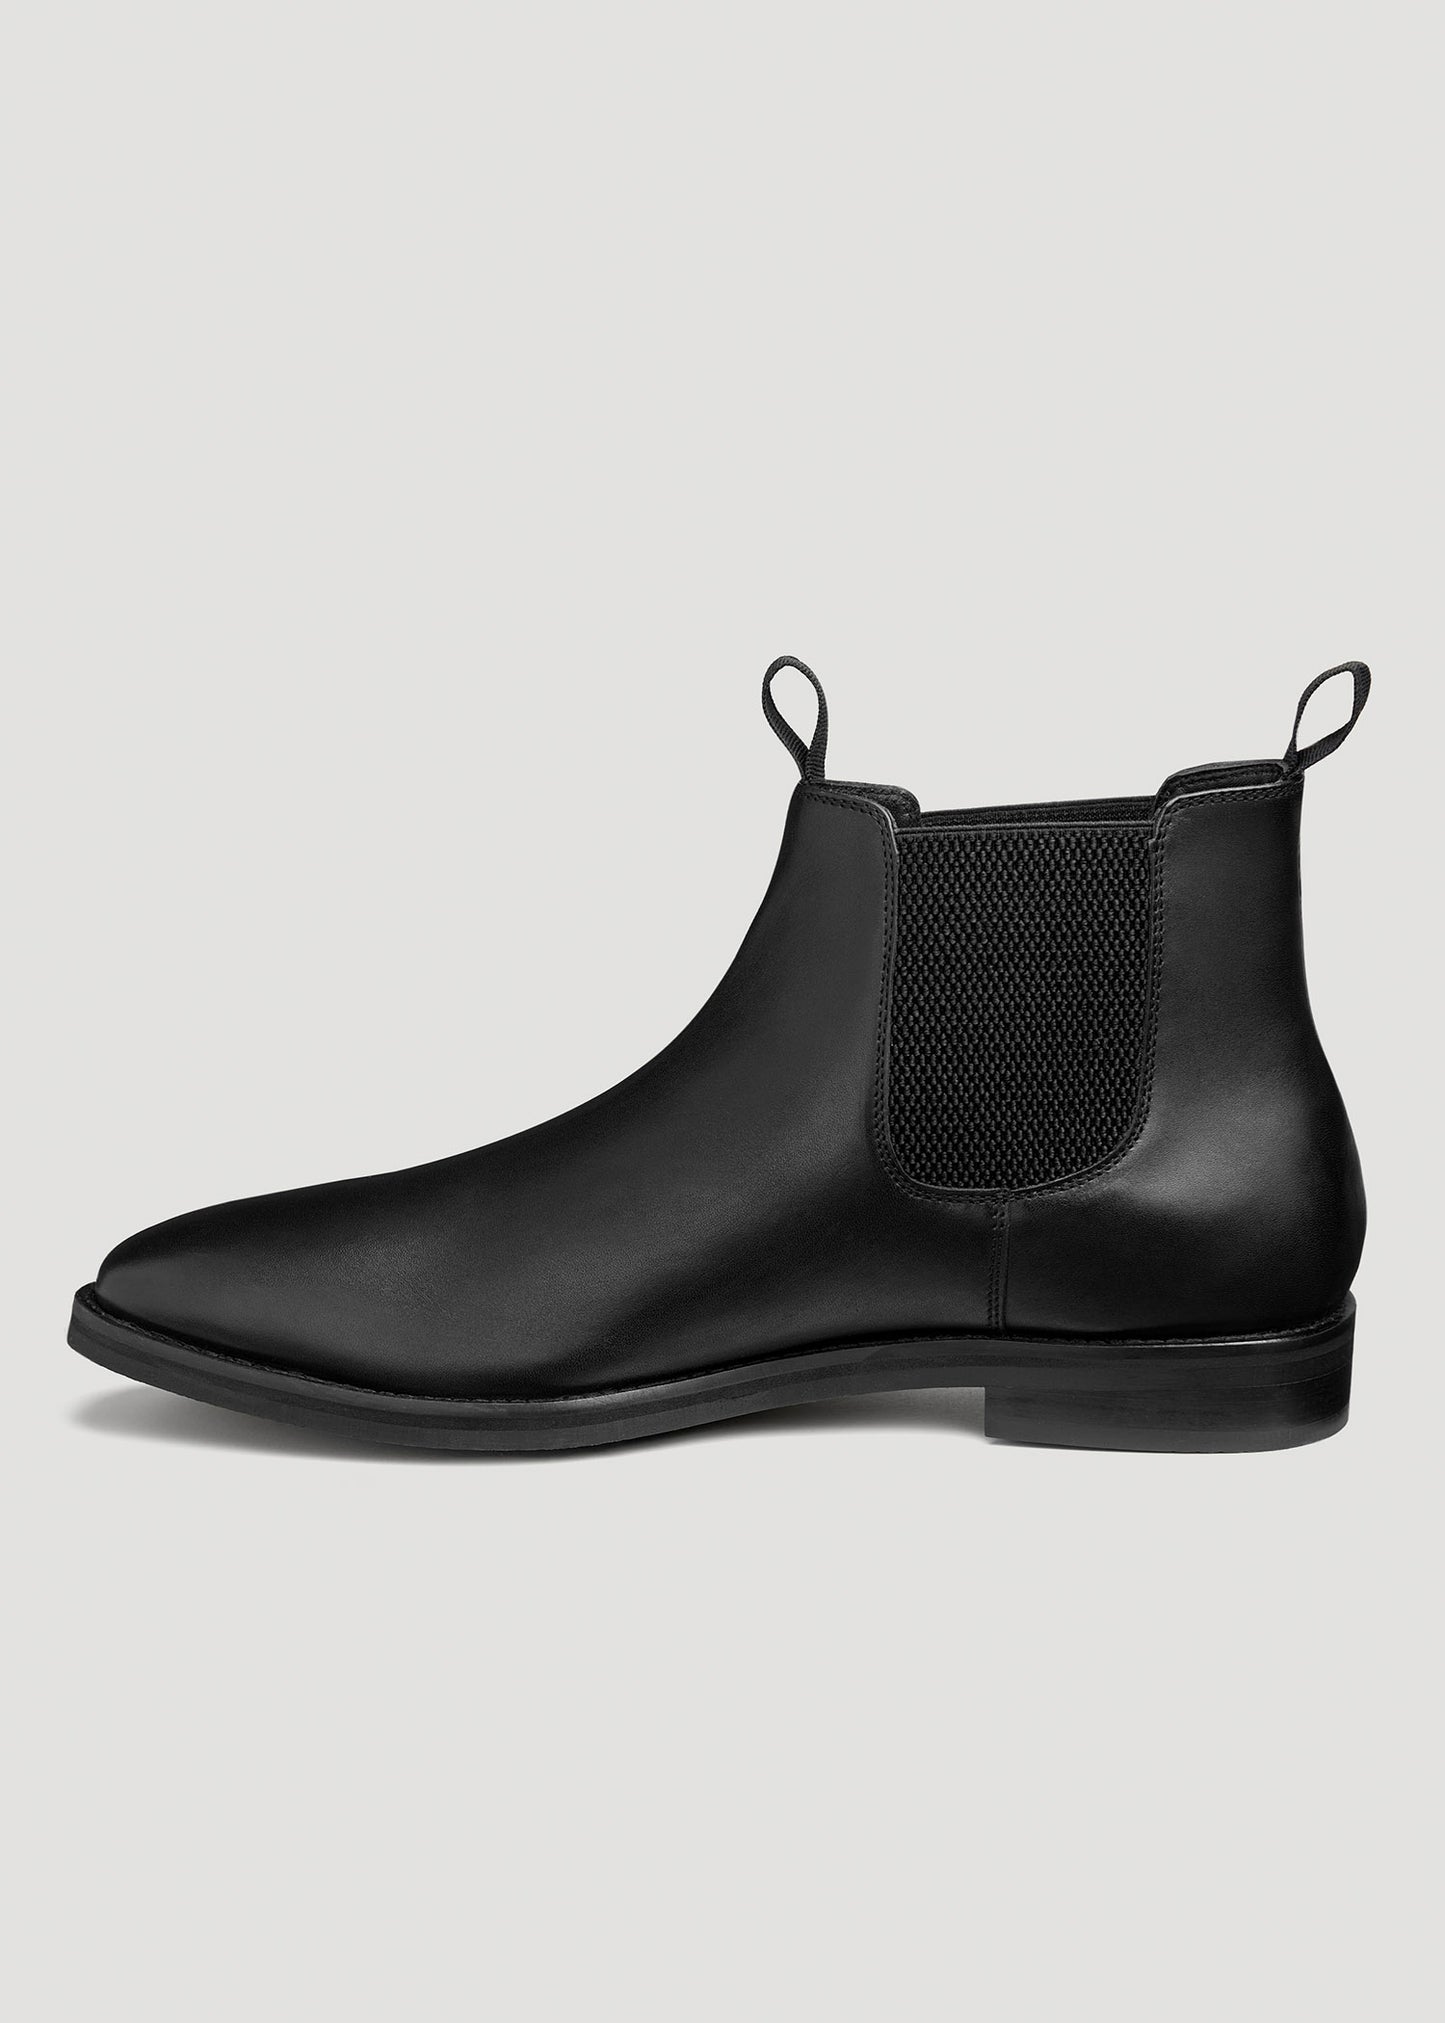 Men's Chelsea Boots Size 13 to 15 | American Tall